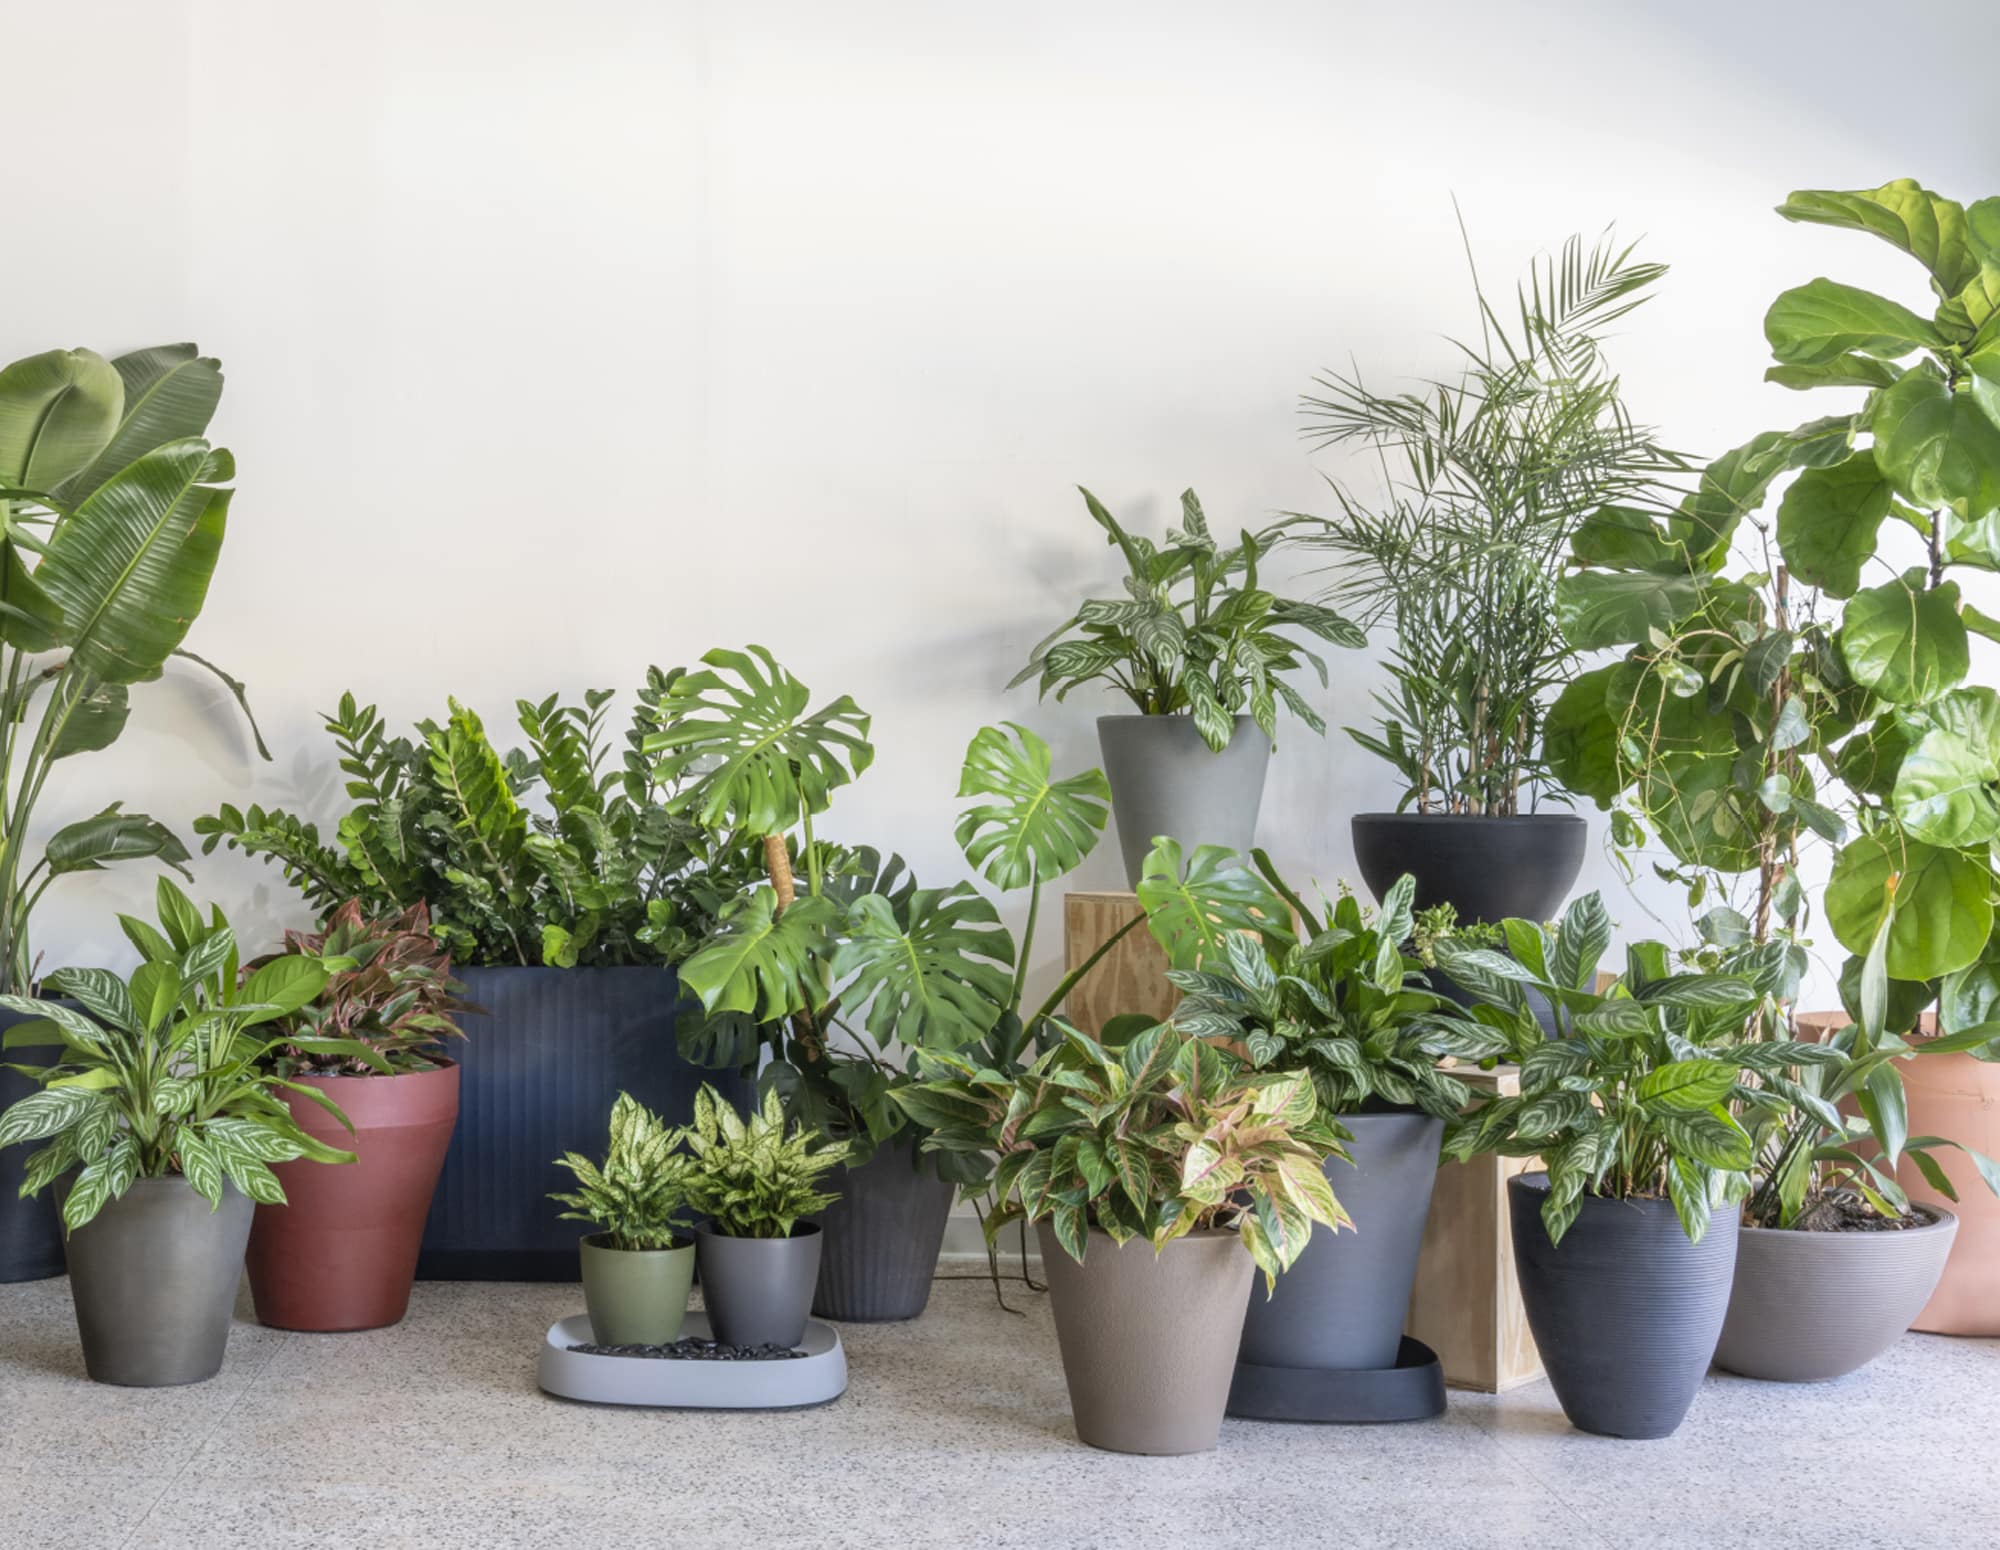 Beautiful modern planters with saucers and caddies for houseplants and outdoors